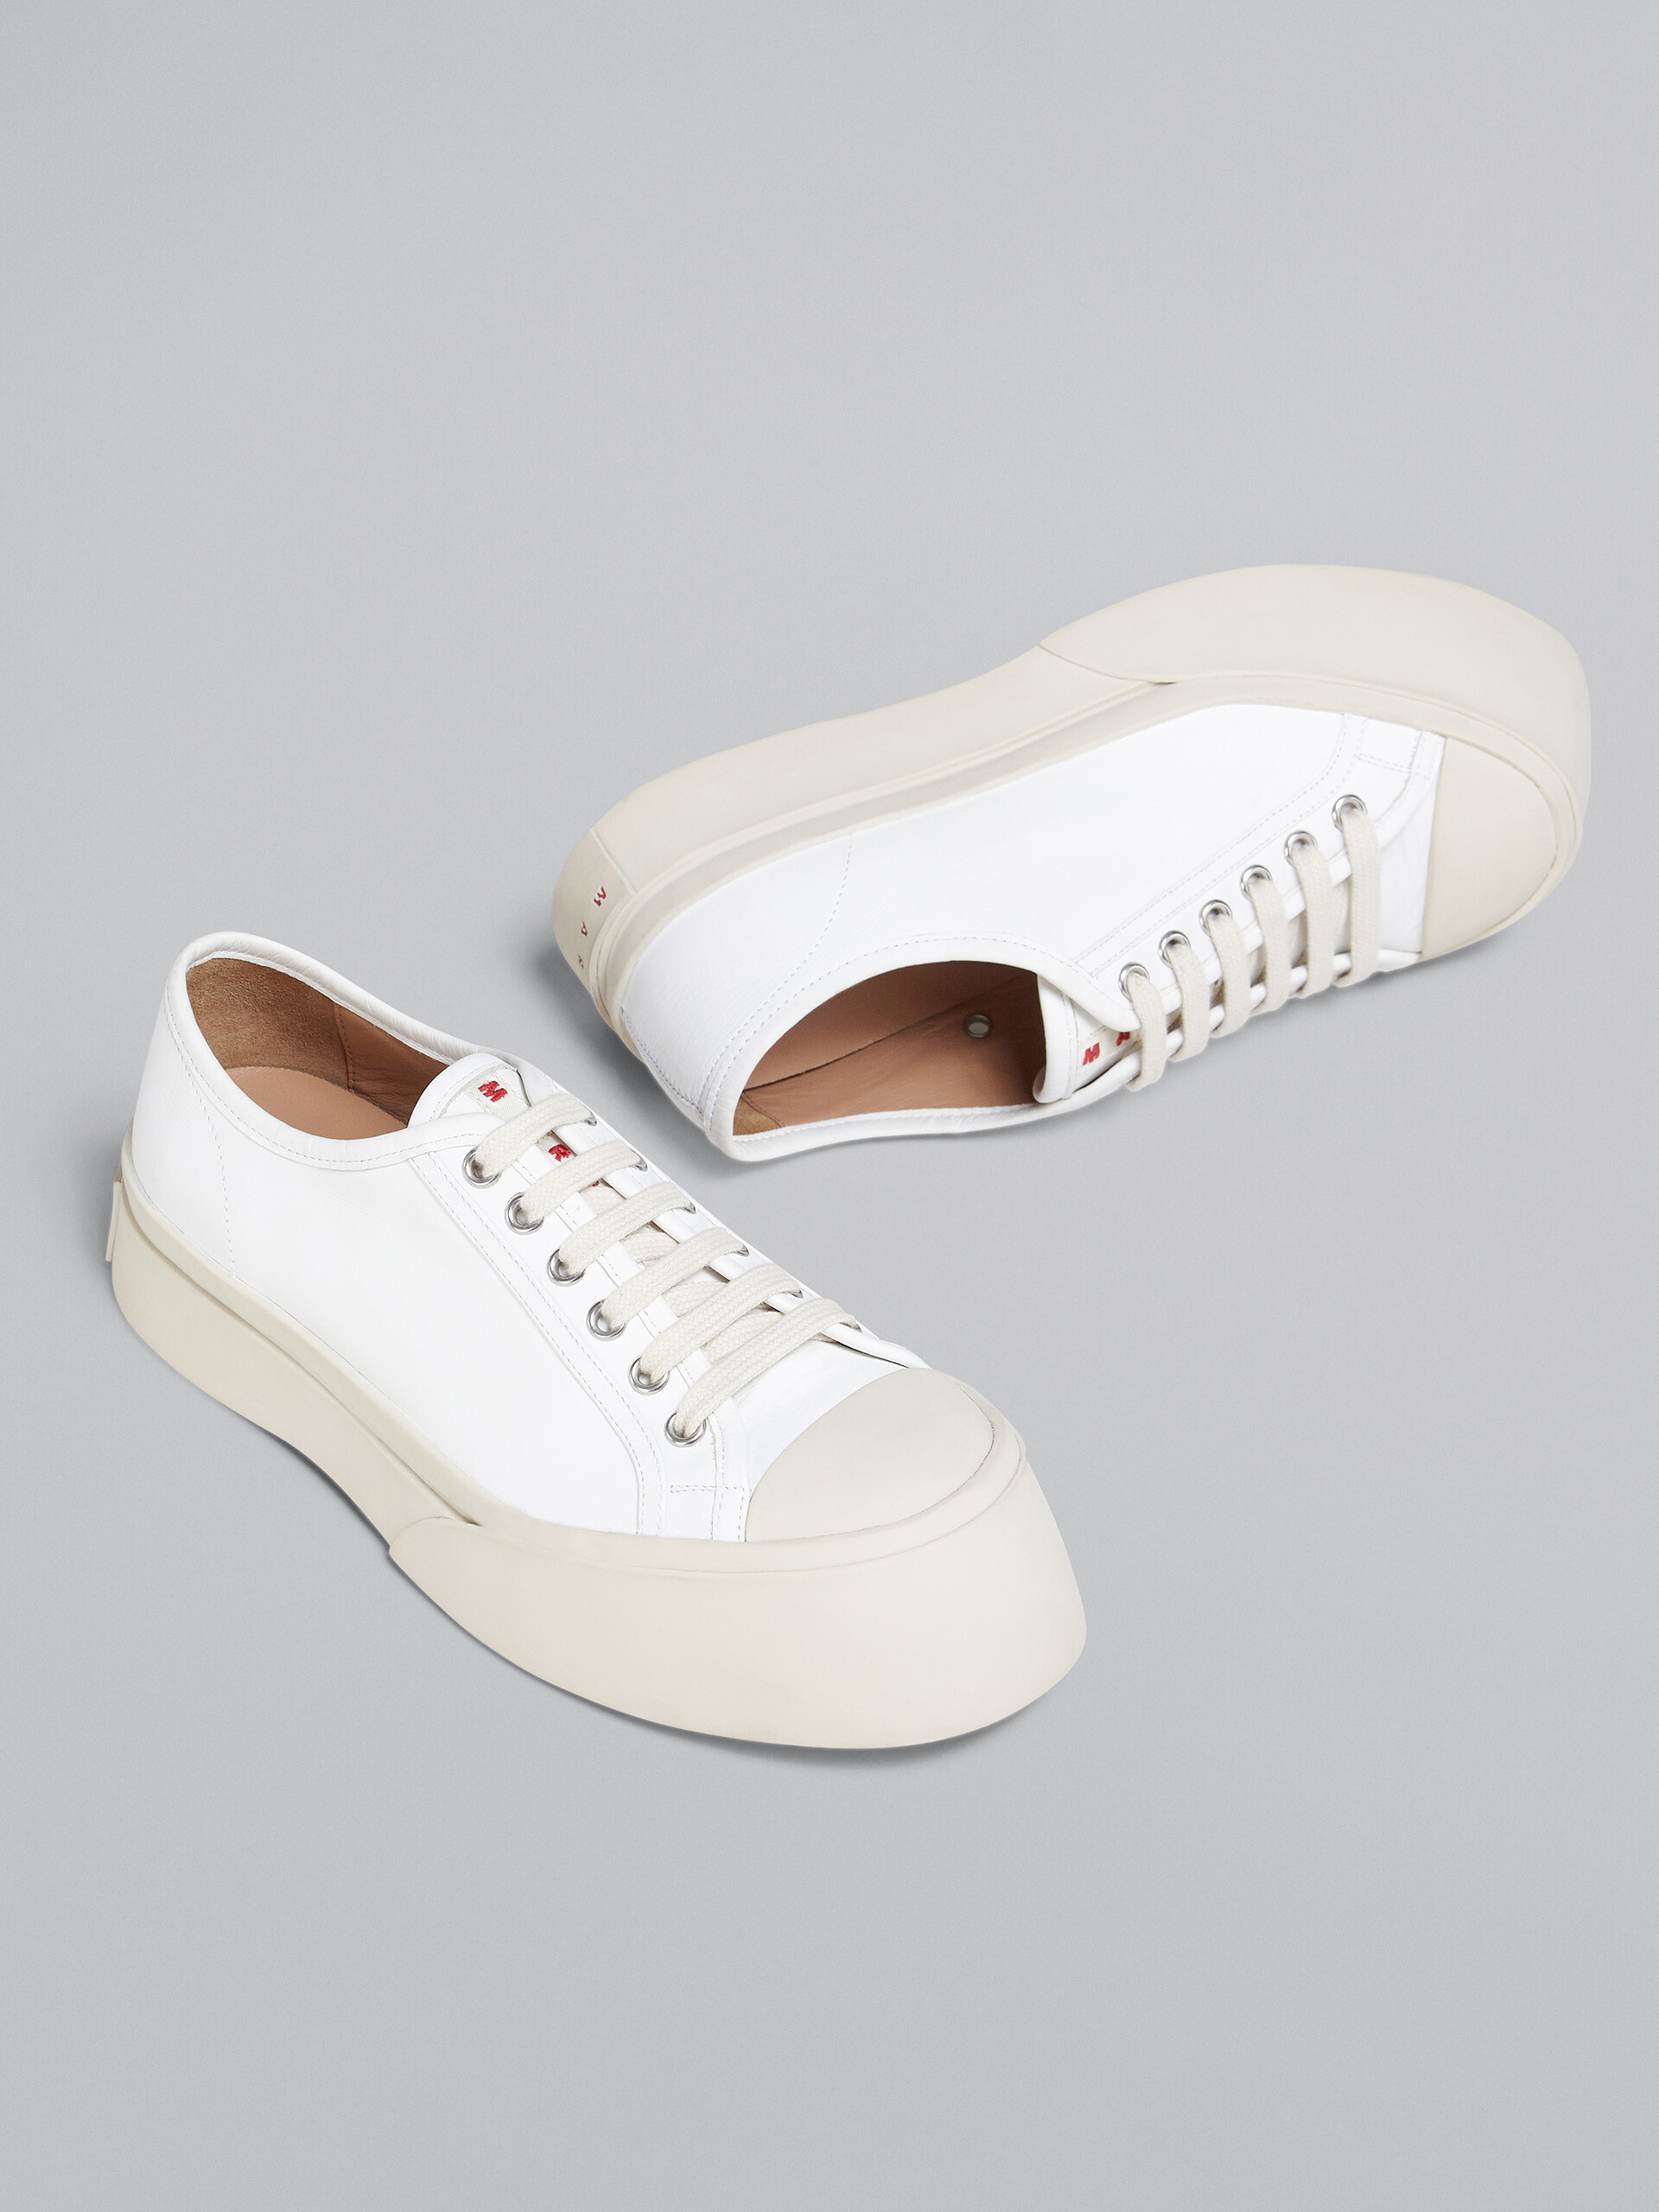 White nappa leather PABLO sneaker - Sneakers - Image 5